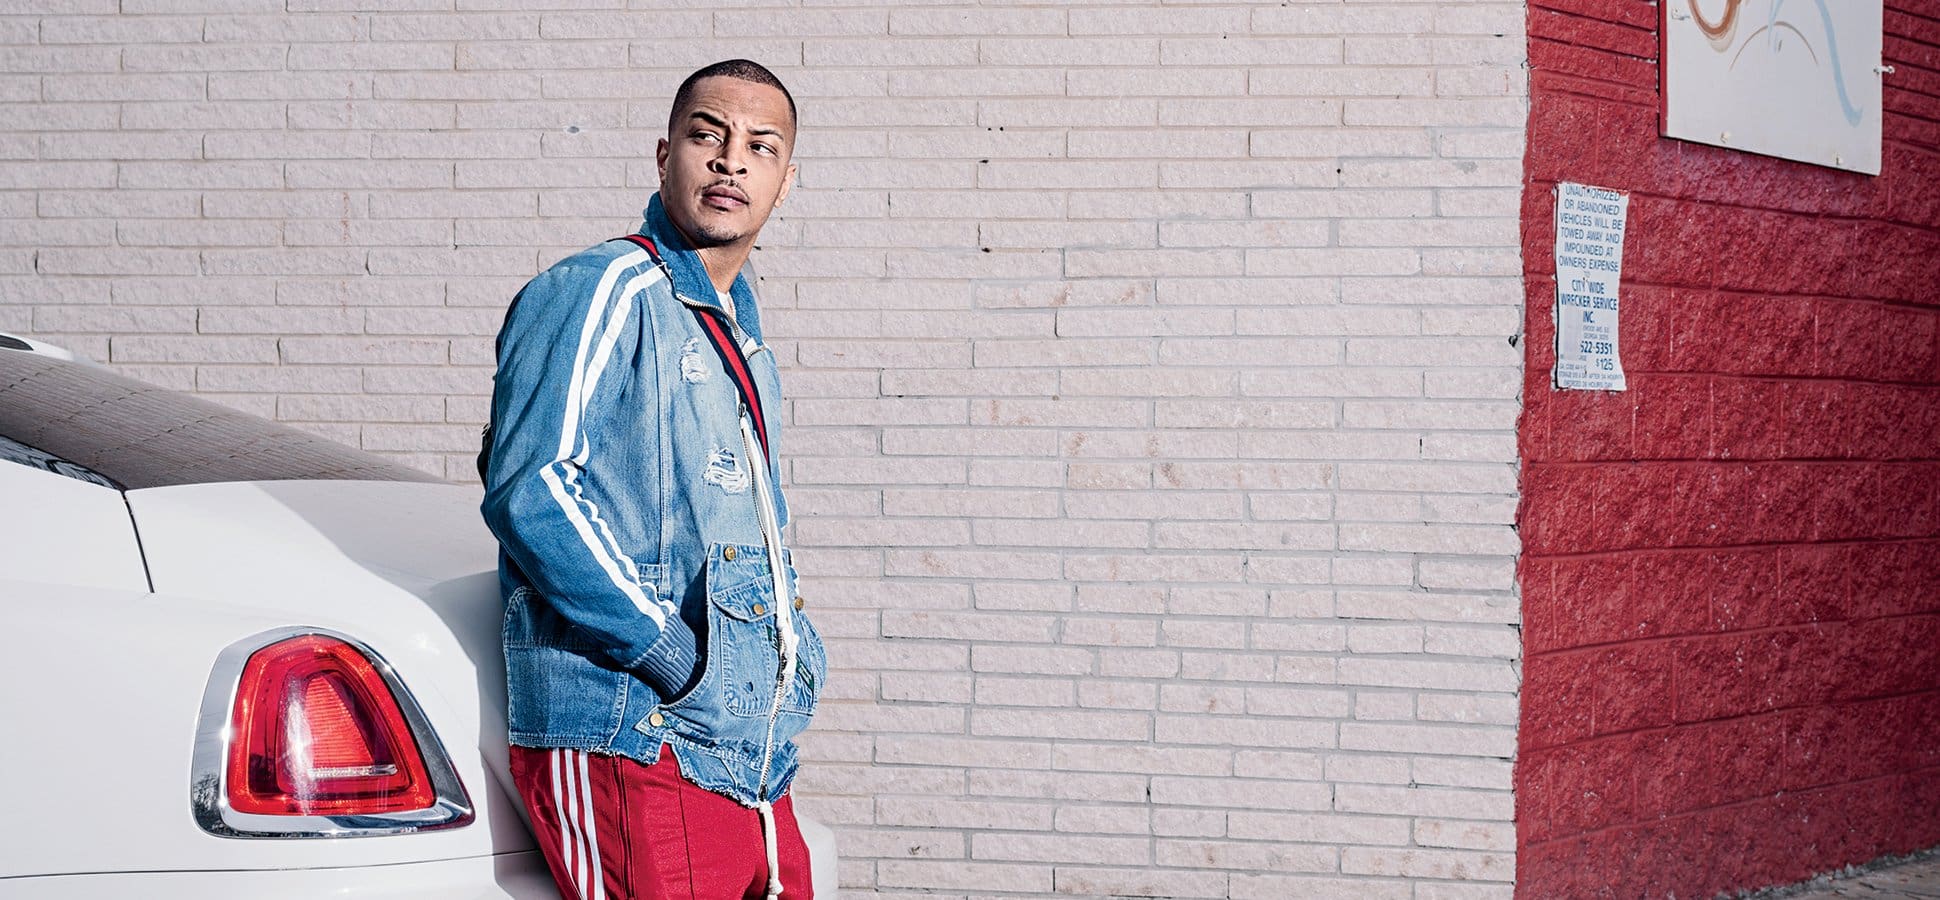 T.I. Shared Photos From The Legendary Apollo Night And Fans Praise His Elegant Look